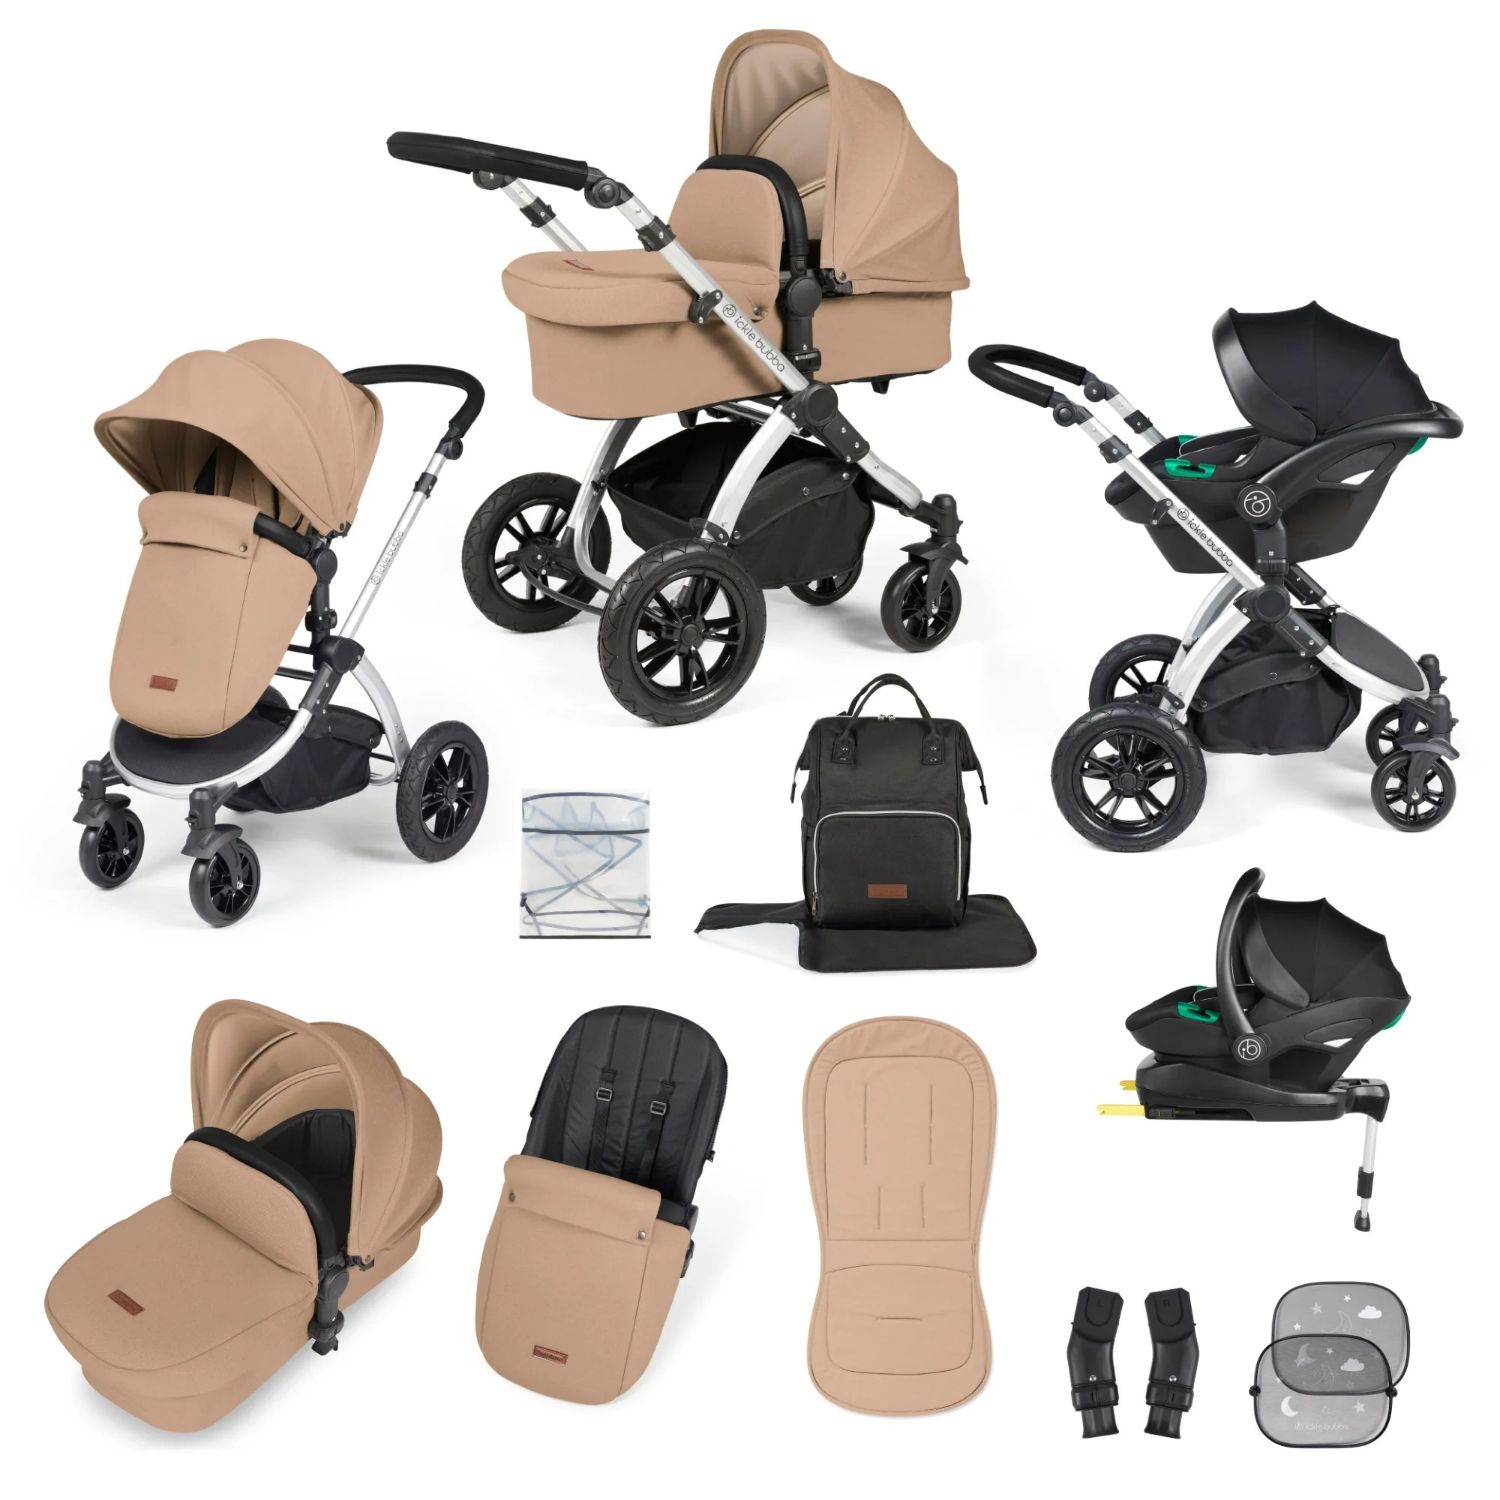 Ickle Bubba Stomp Luxe All-in-One Travel System with Stratus i-Size Car Seat and ISOFIX Base and accessories in Desert beige colour with silver chassis